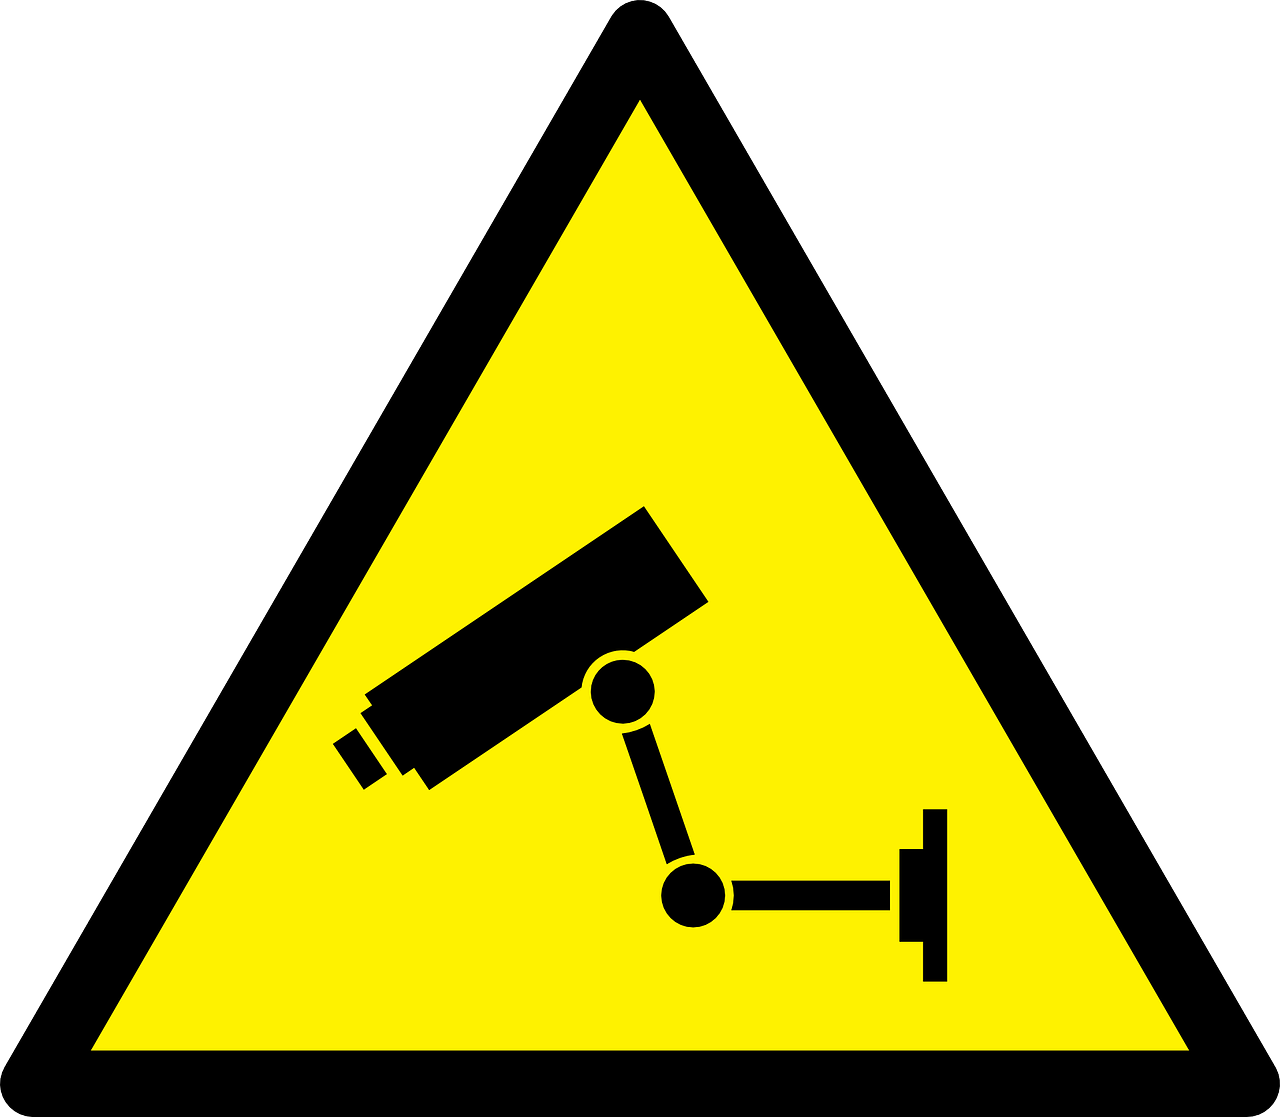 Triangular sign with silhouette of a security camera on a field of yellow